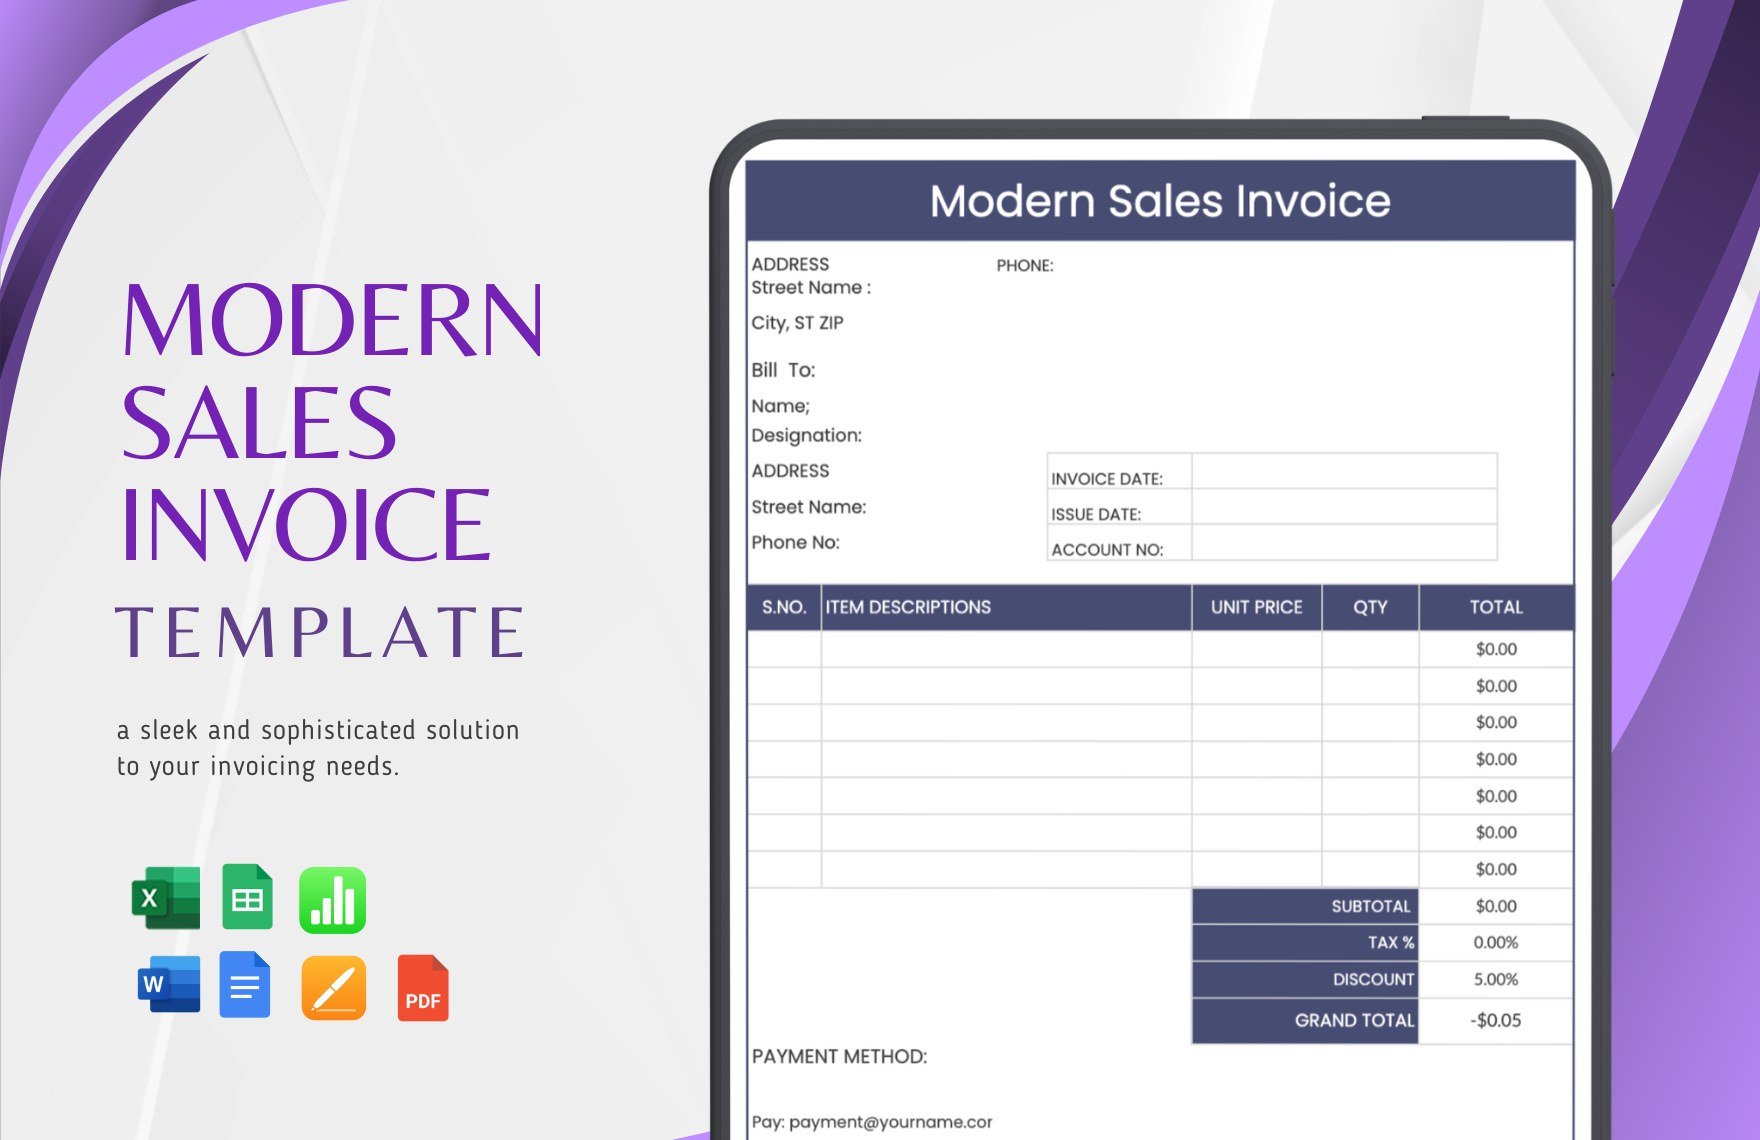 Modern Sales Invoice Template in Word, Google Docs, Excel, PDF, Google Sheets, Apple Pages, Apple Numbers